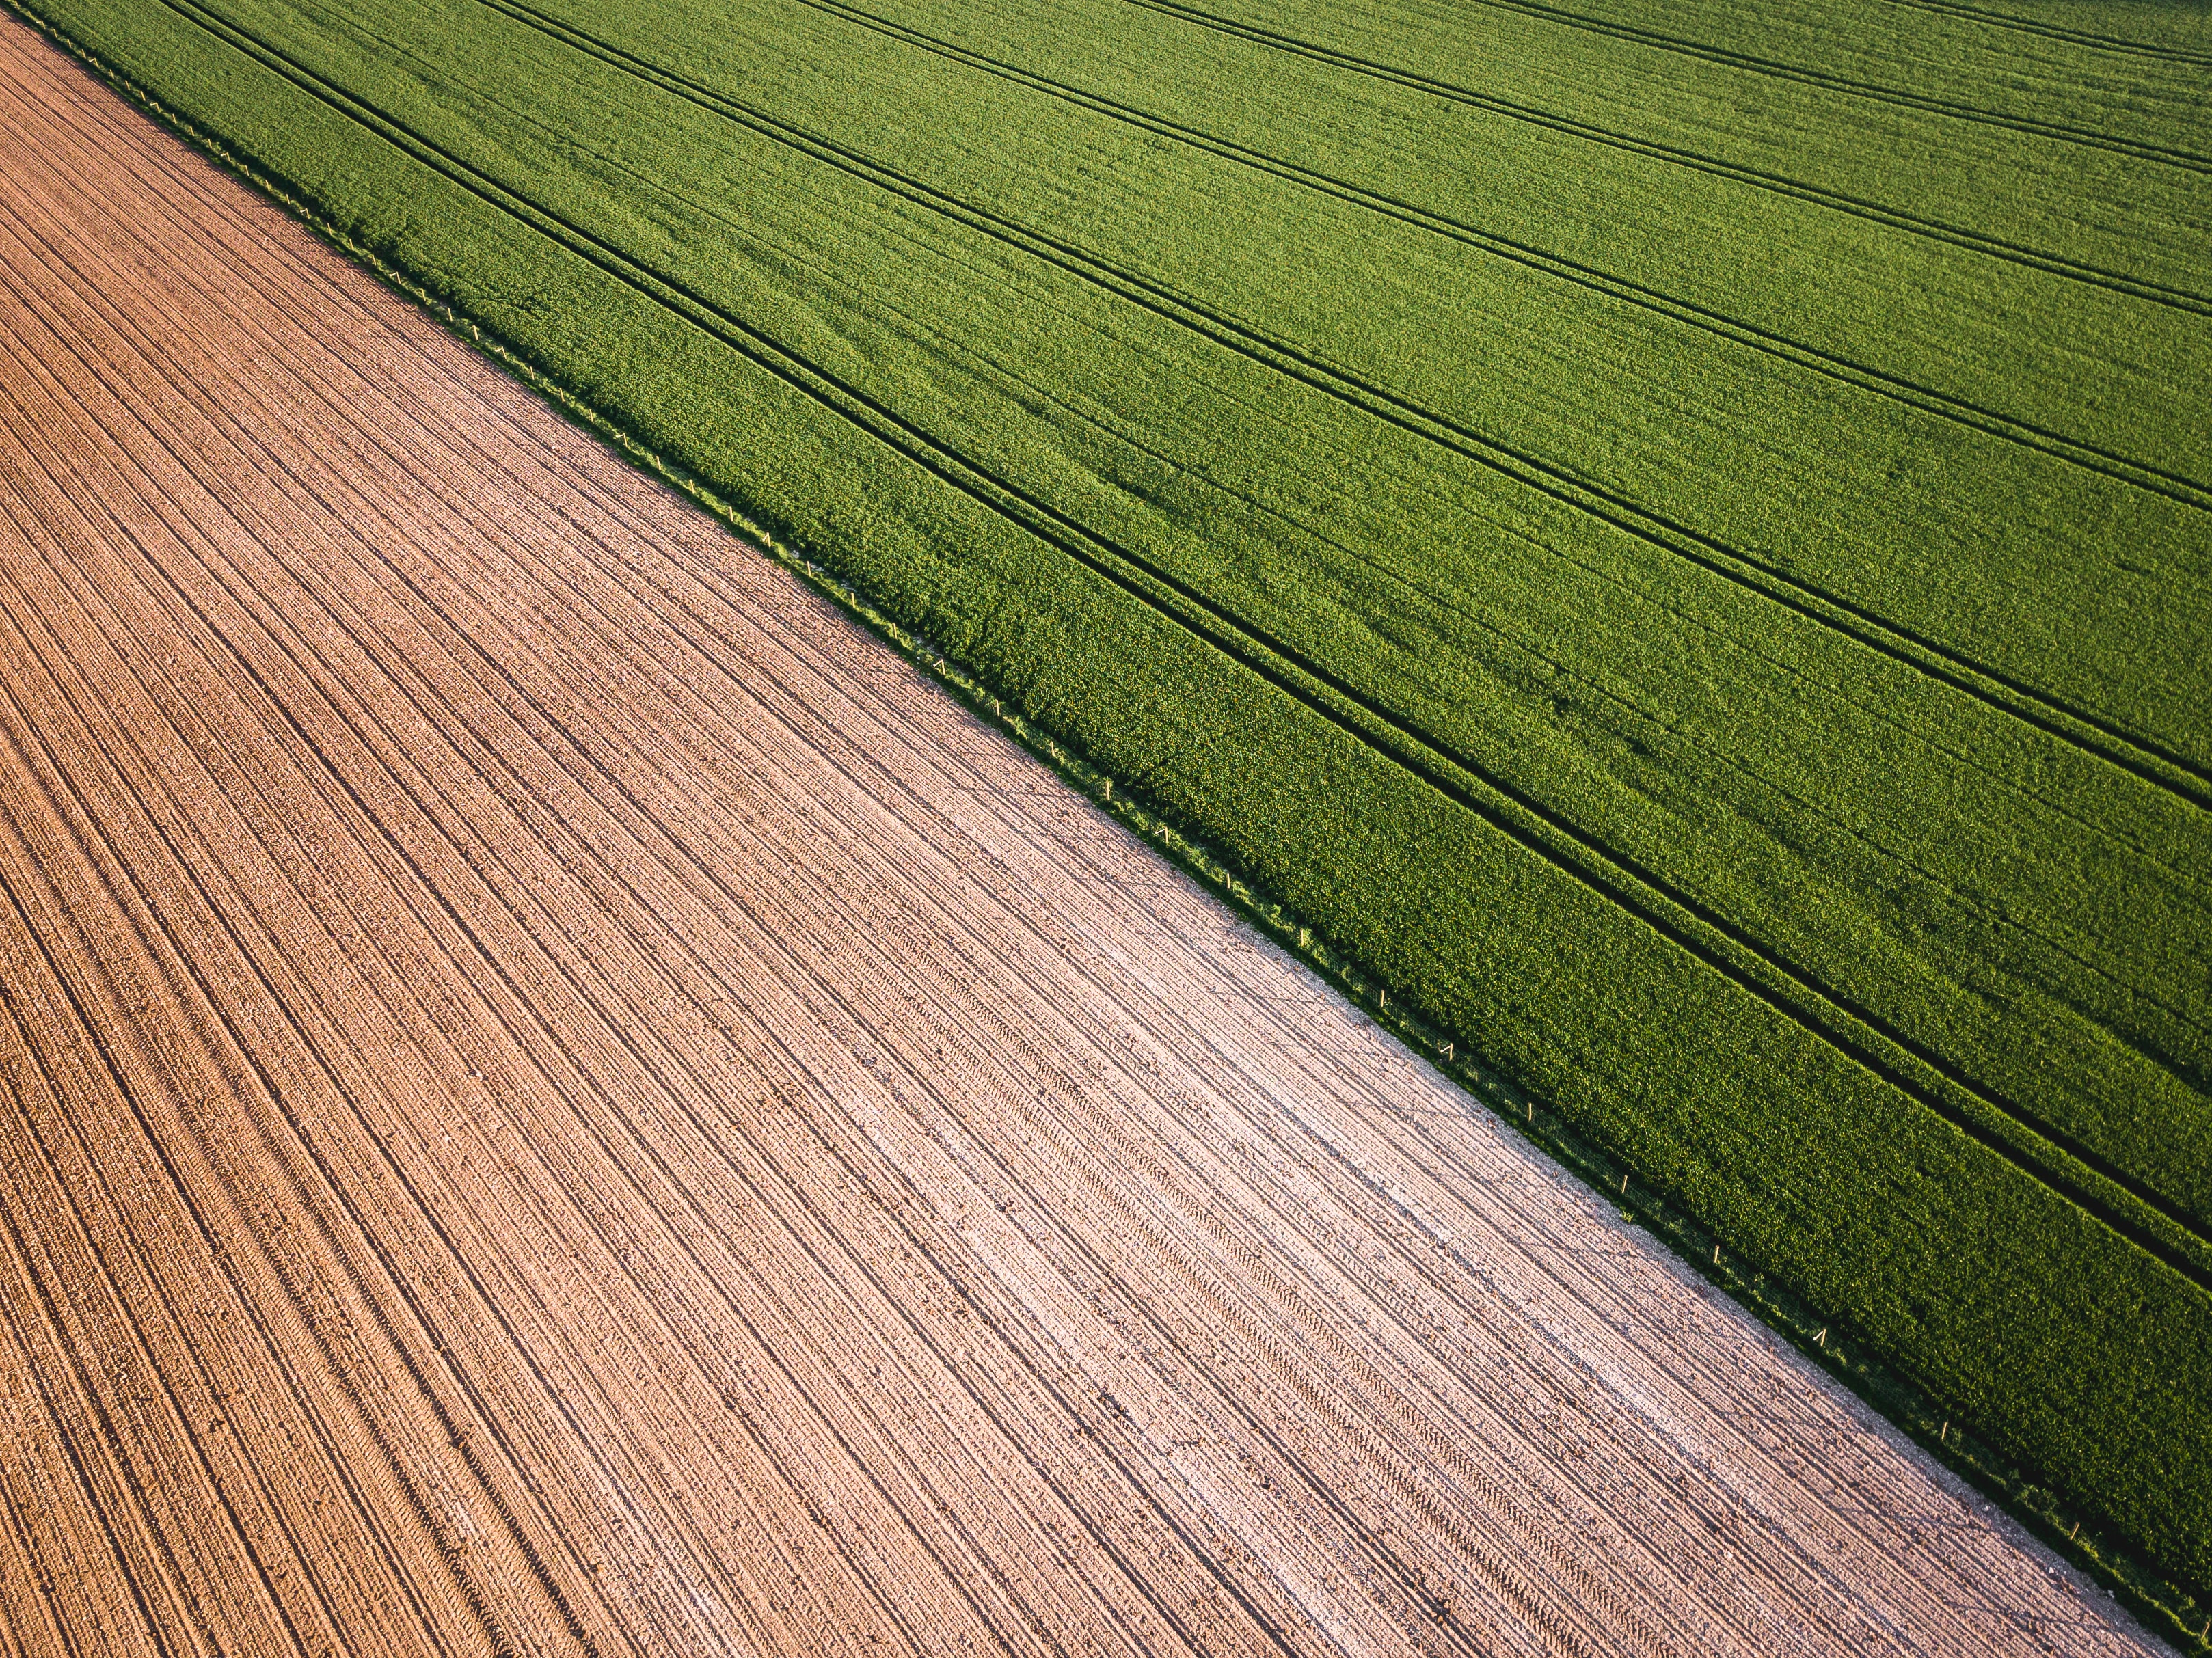 Seraphim Capital leads funding drive for crop monitoring specialists